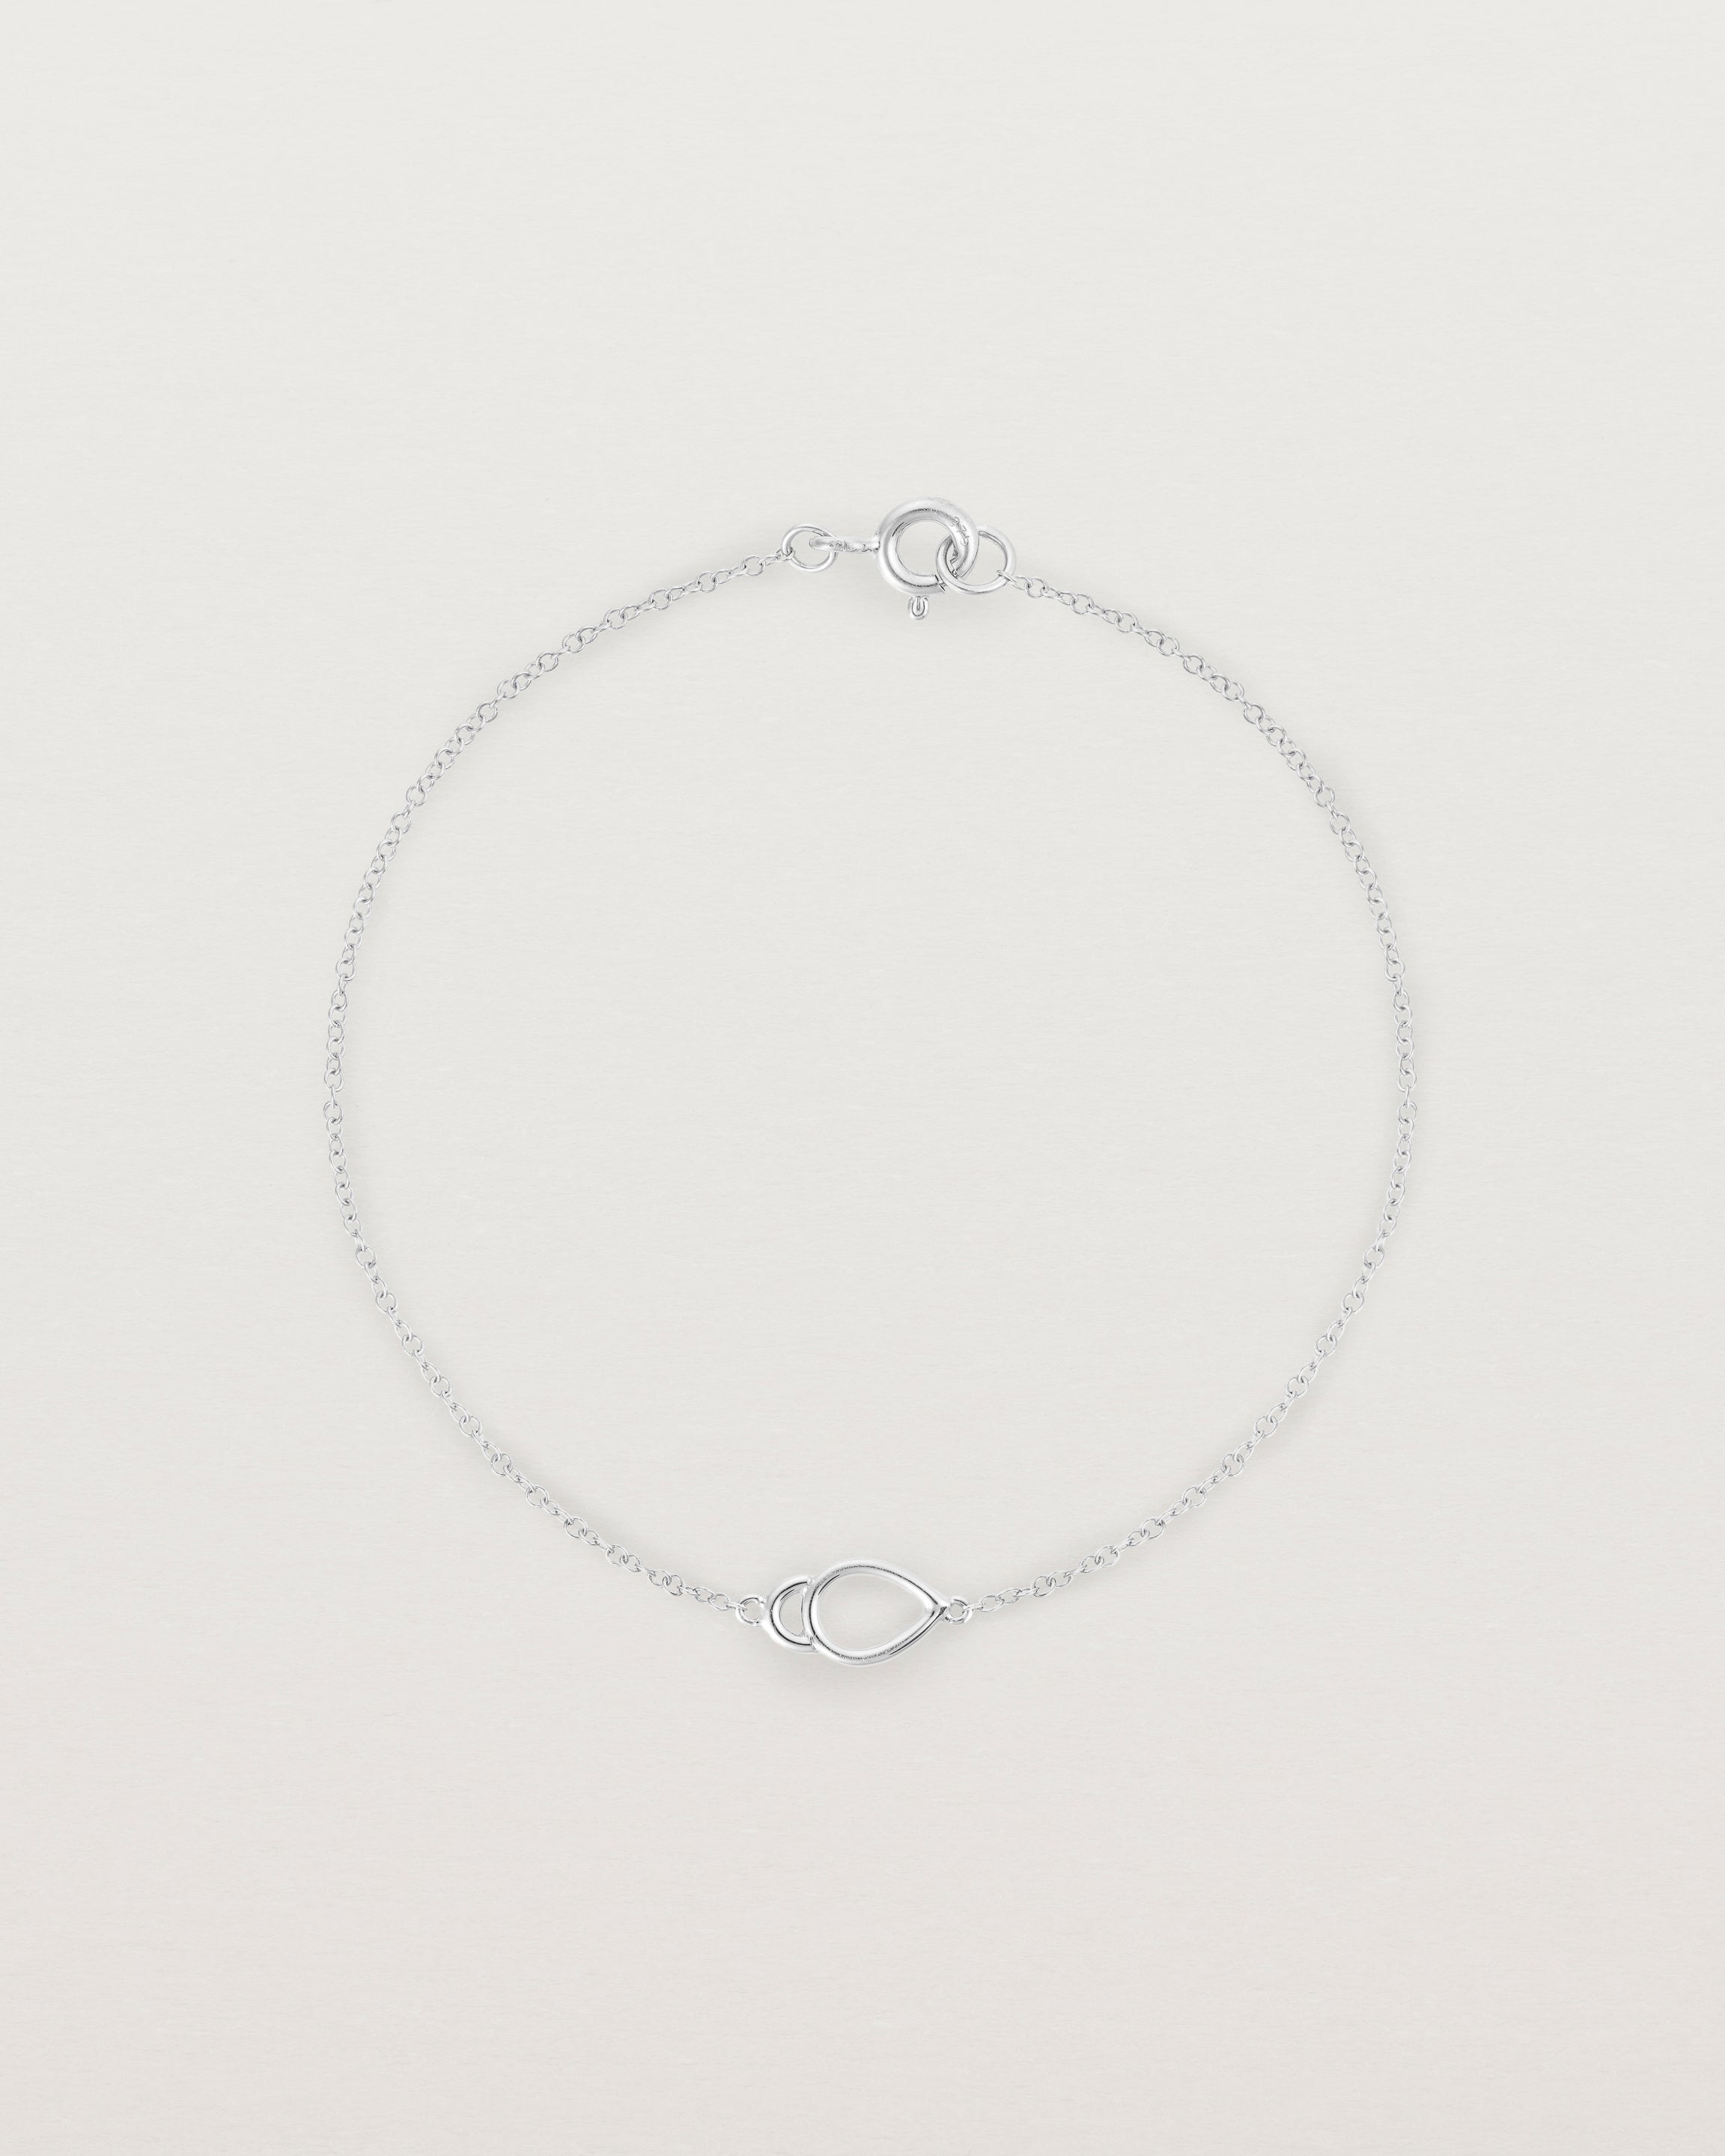 A sterling silver chain with an oval pendant